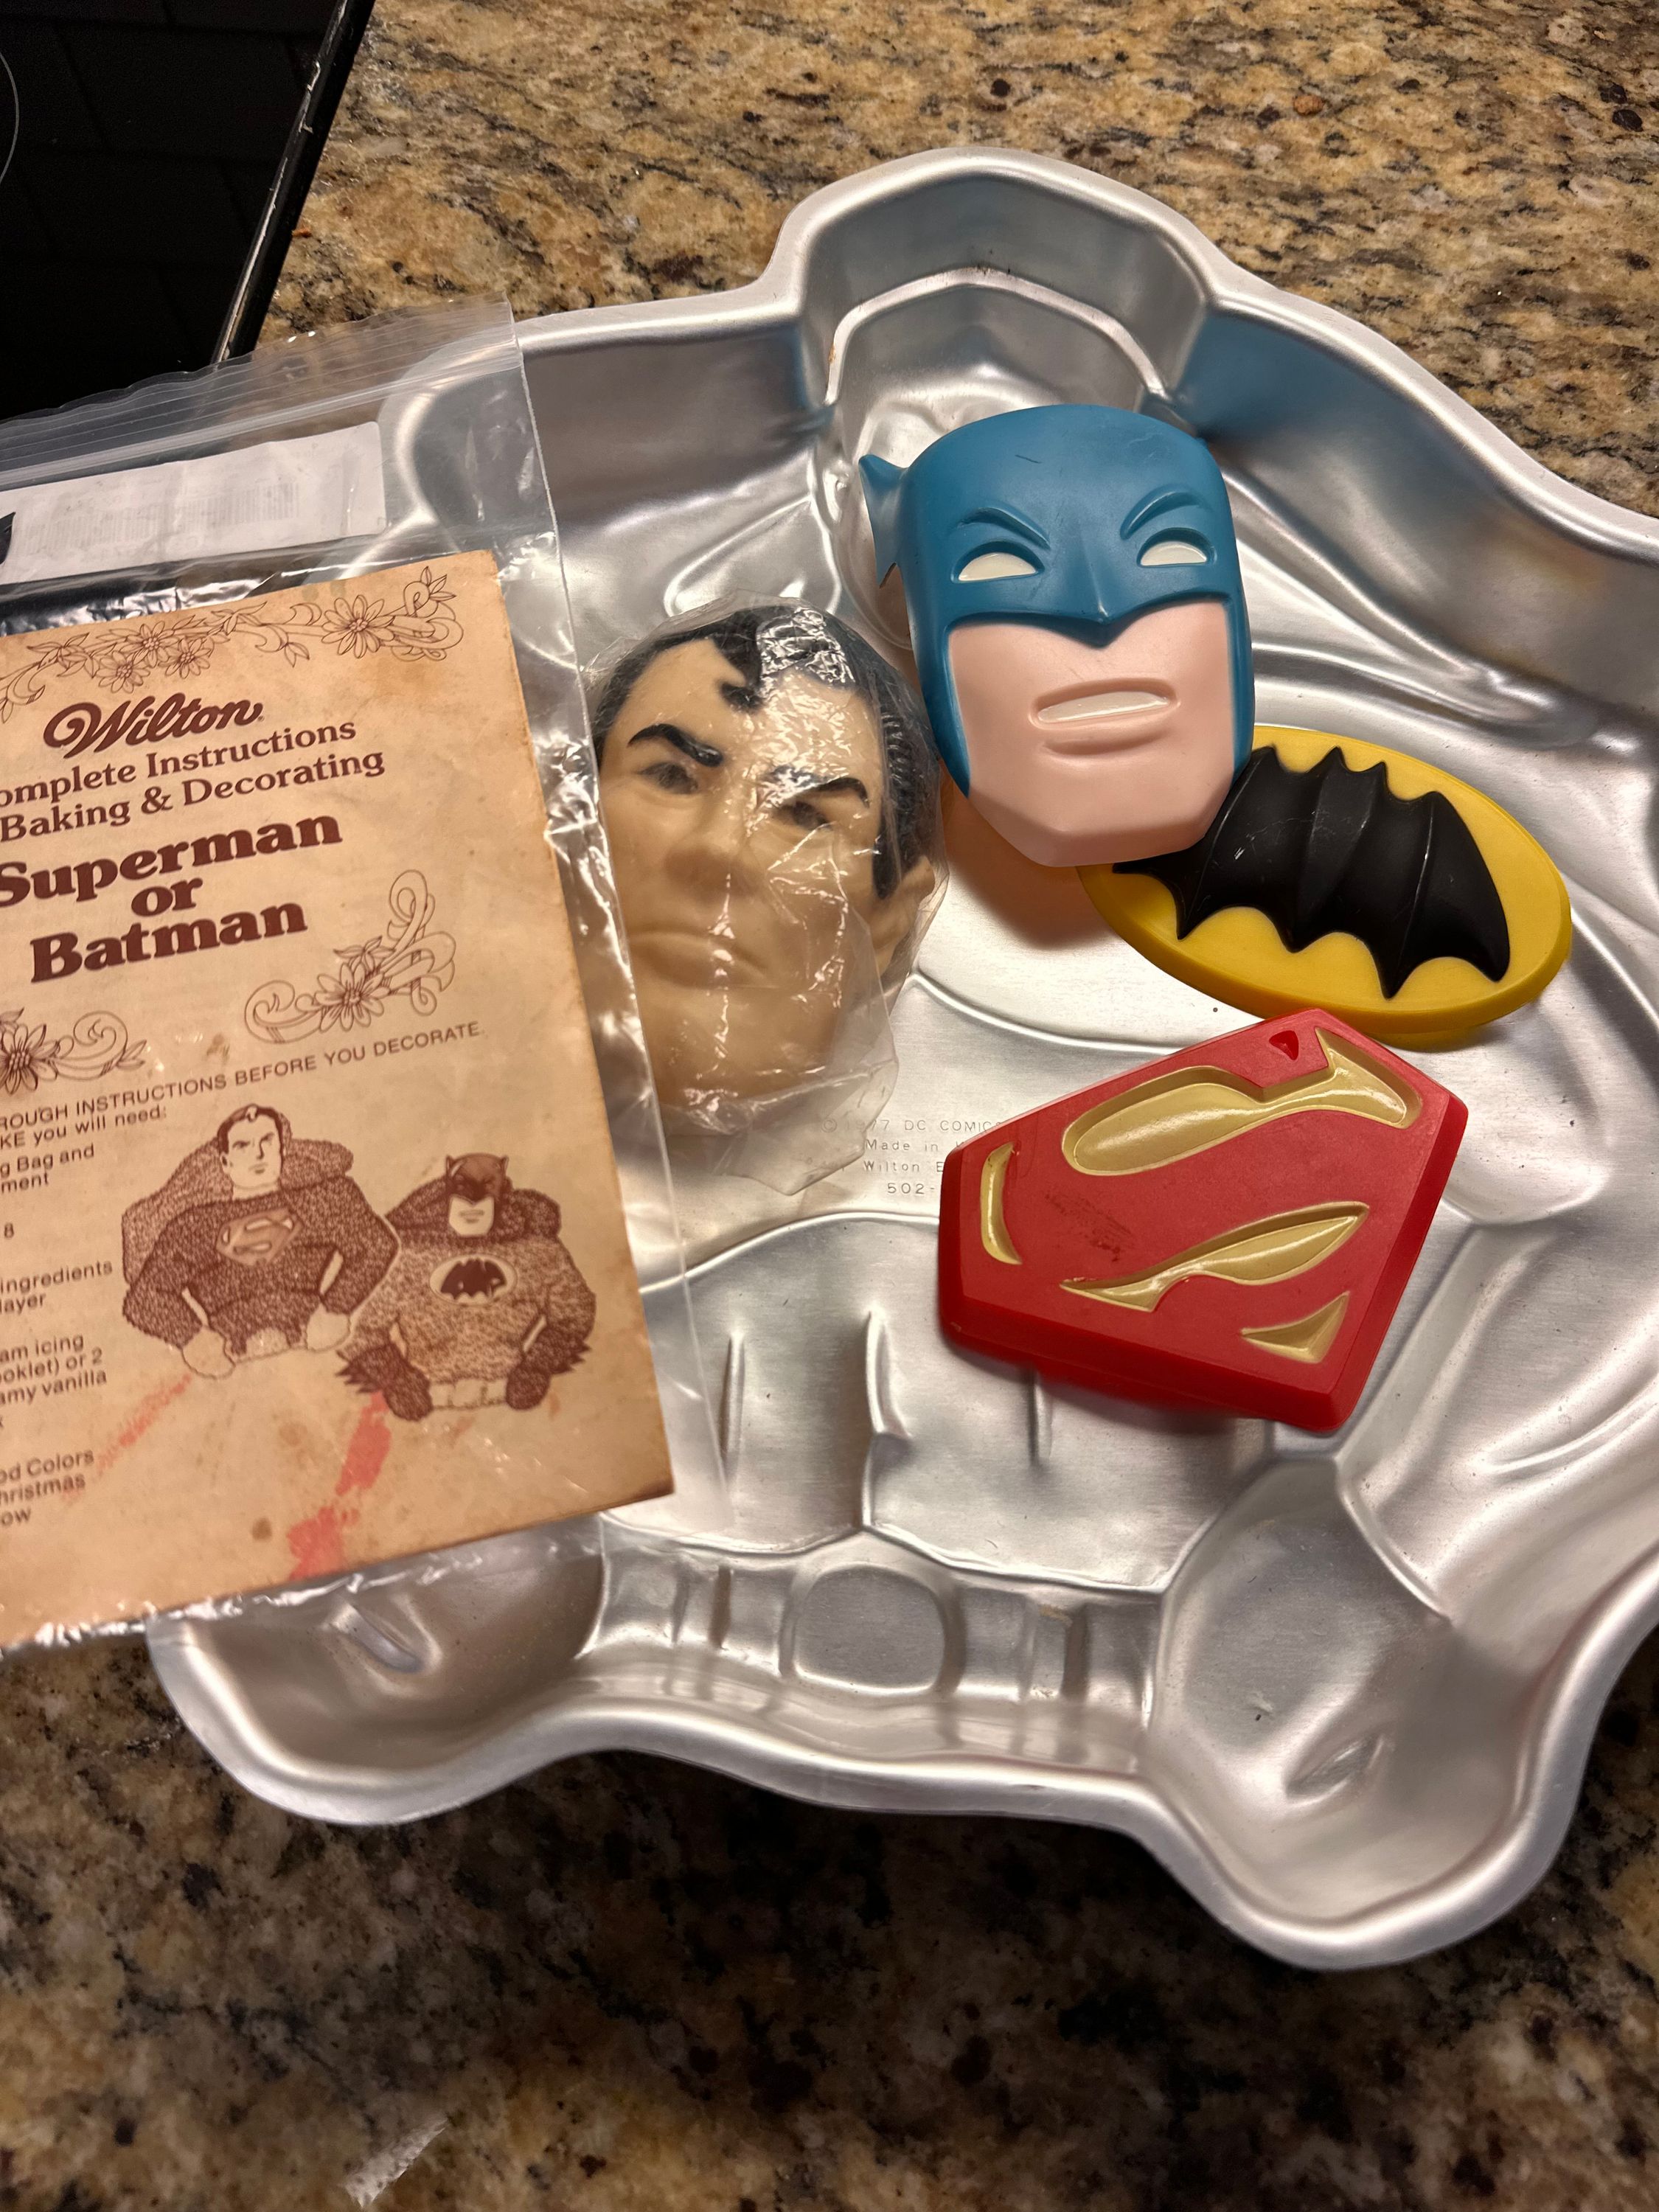 Superman or Batman cake pan with accessories and instructions